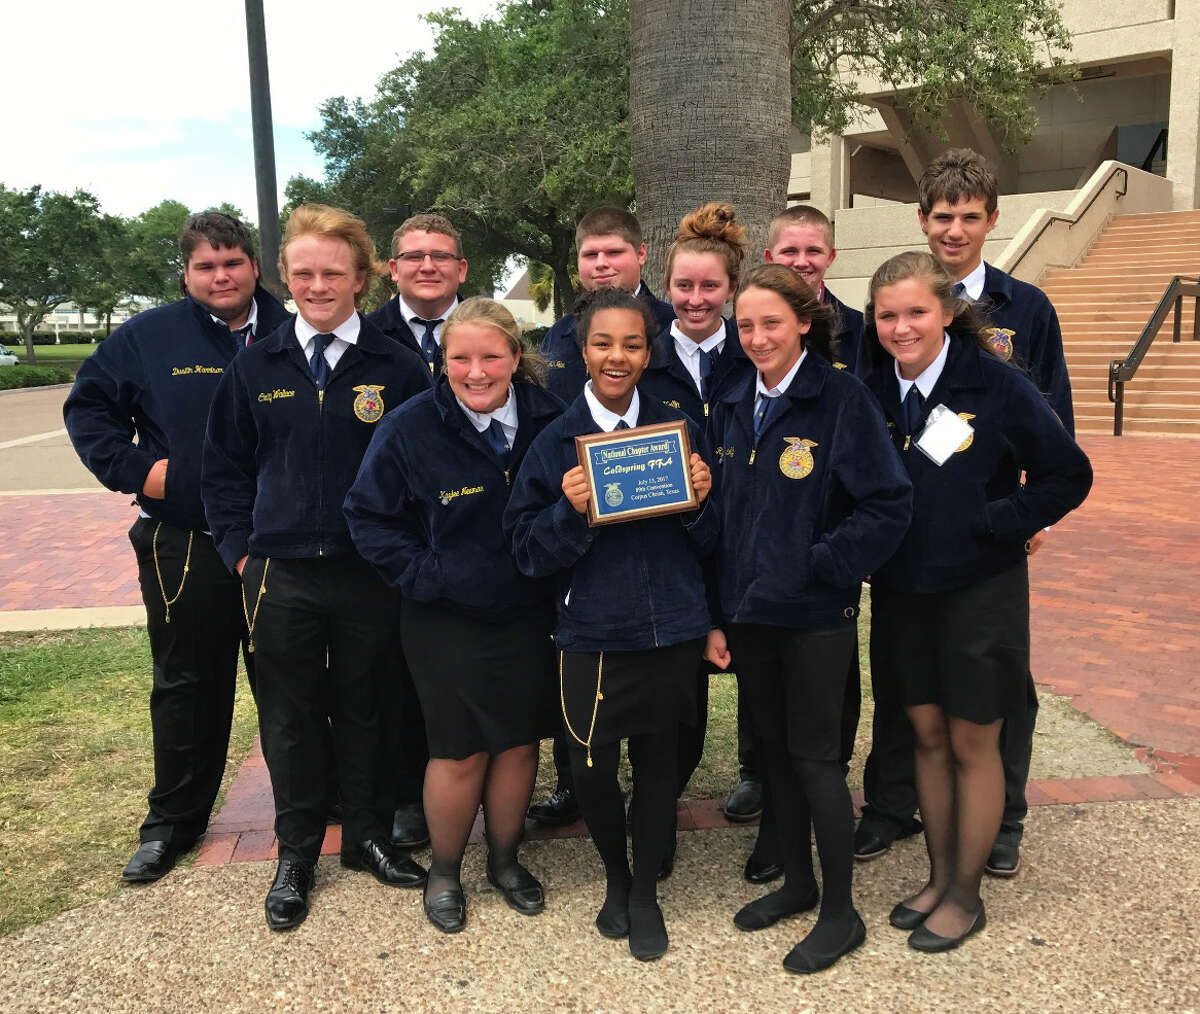 Coldspring FFA chapter brings home awards from State